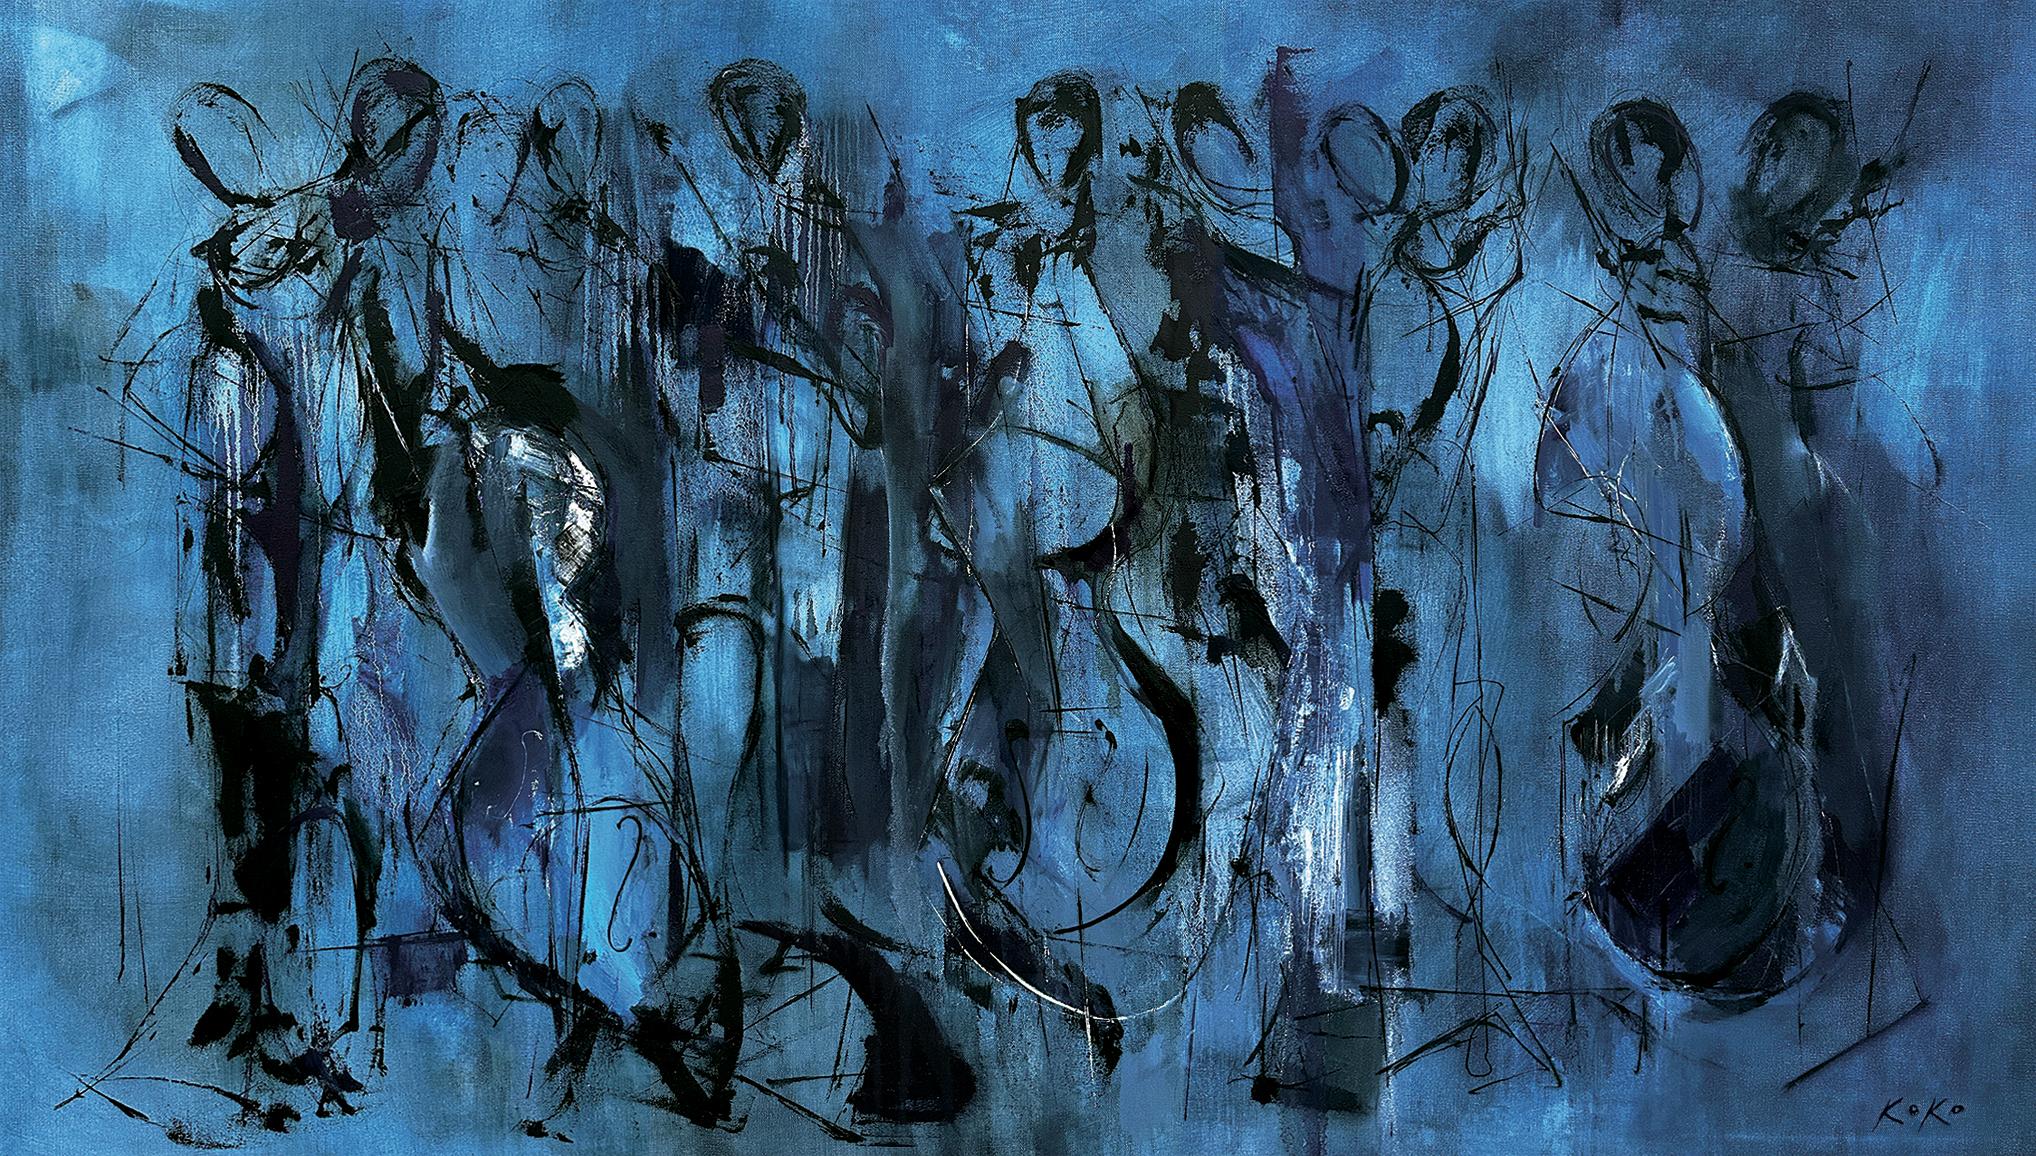 Abstract musicians oil painting, Musician Monochromatic Musicians, In Deep Blue. - Art by KOKO HOVAGUIMIAN